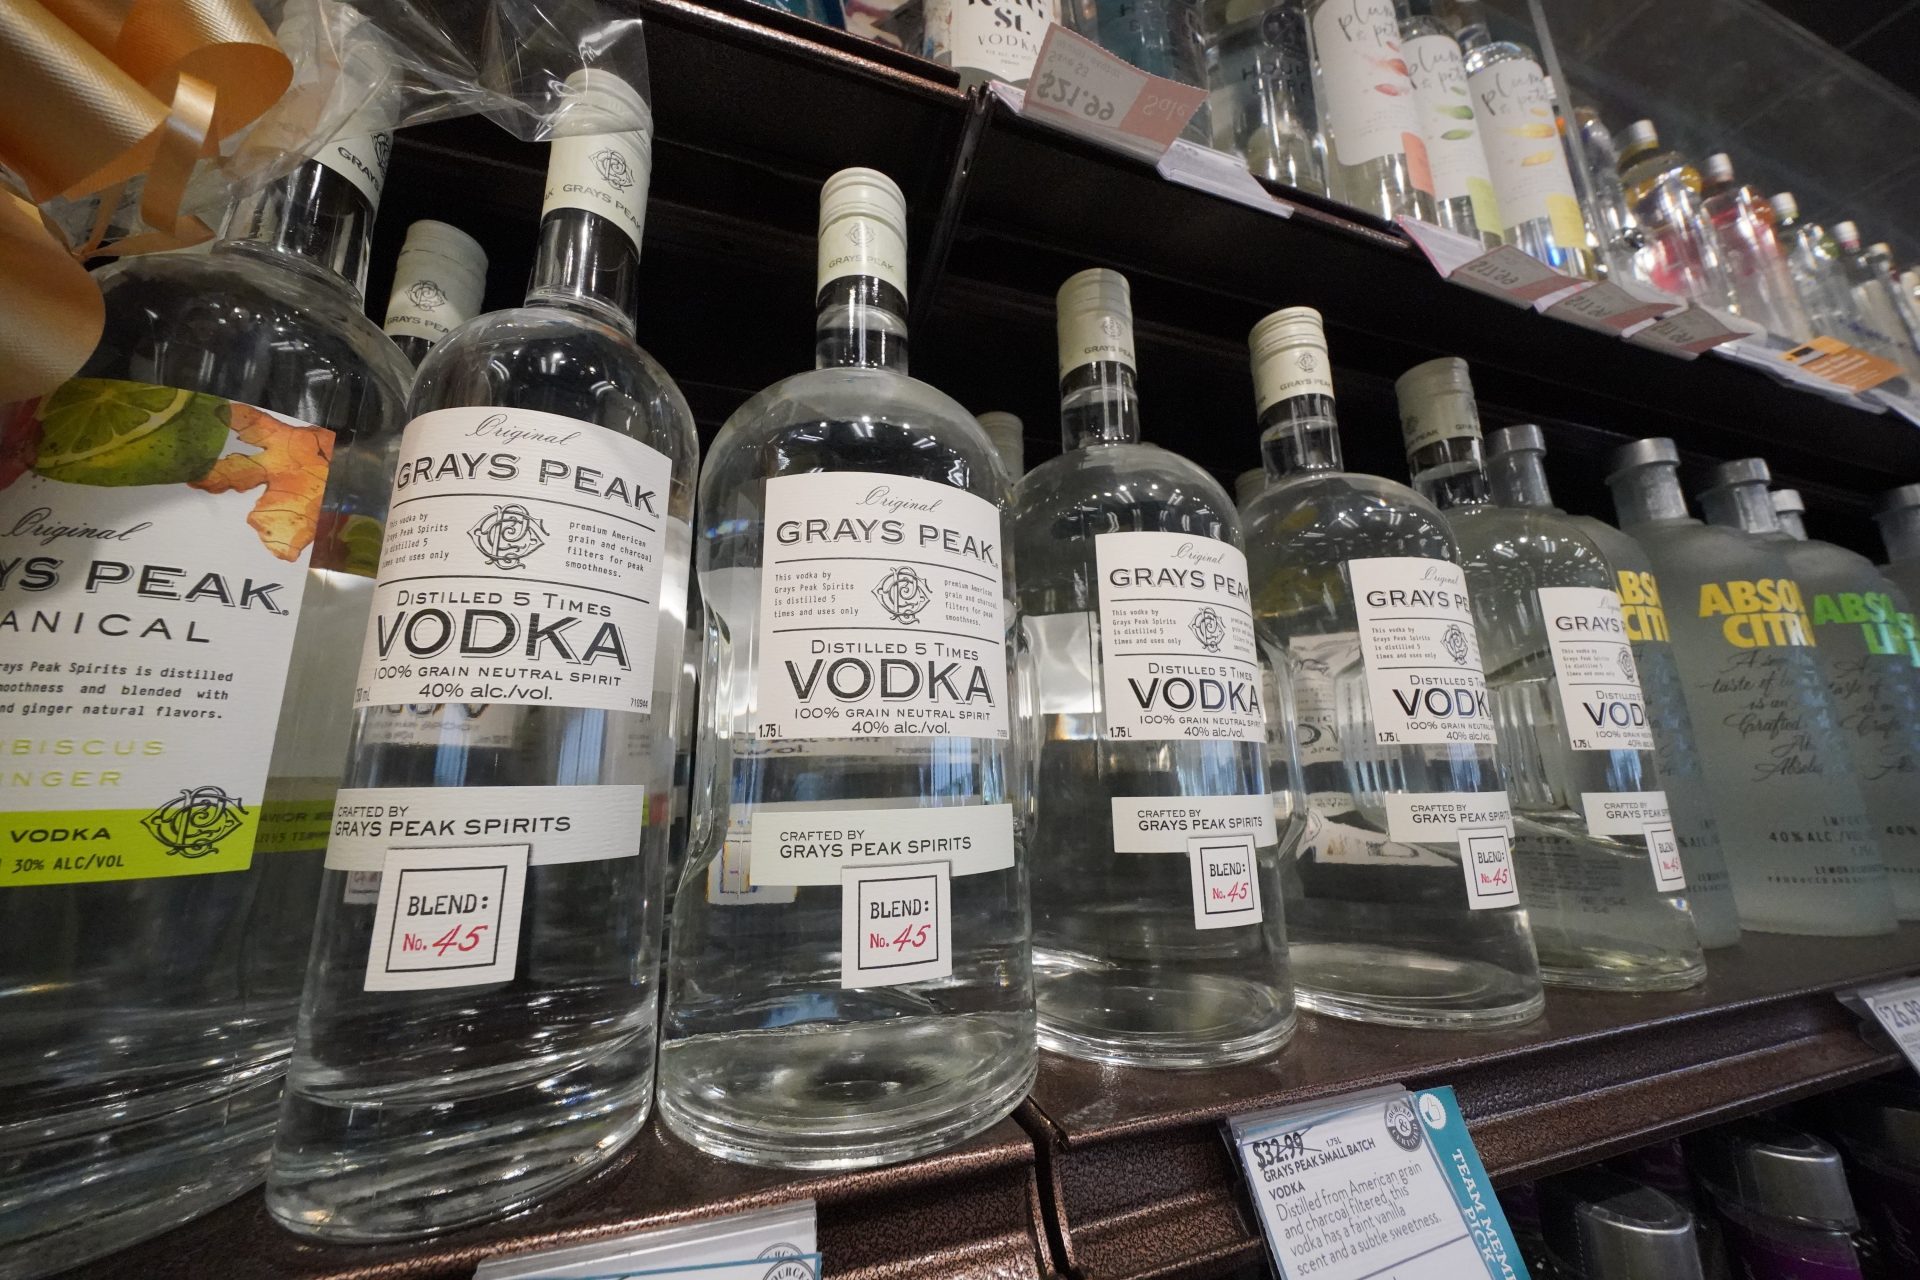 :This is a display of Stolichnaya Vodka from Russia in a Total Wine and More store in University Park, Fla., on Sunday, Feb. 27, 2022.